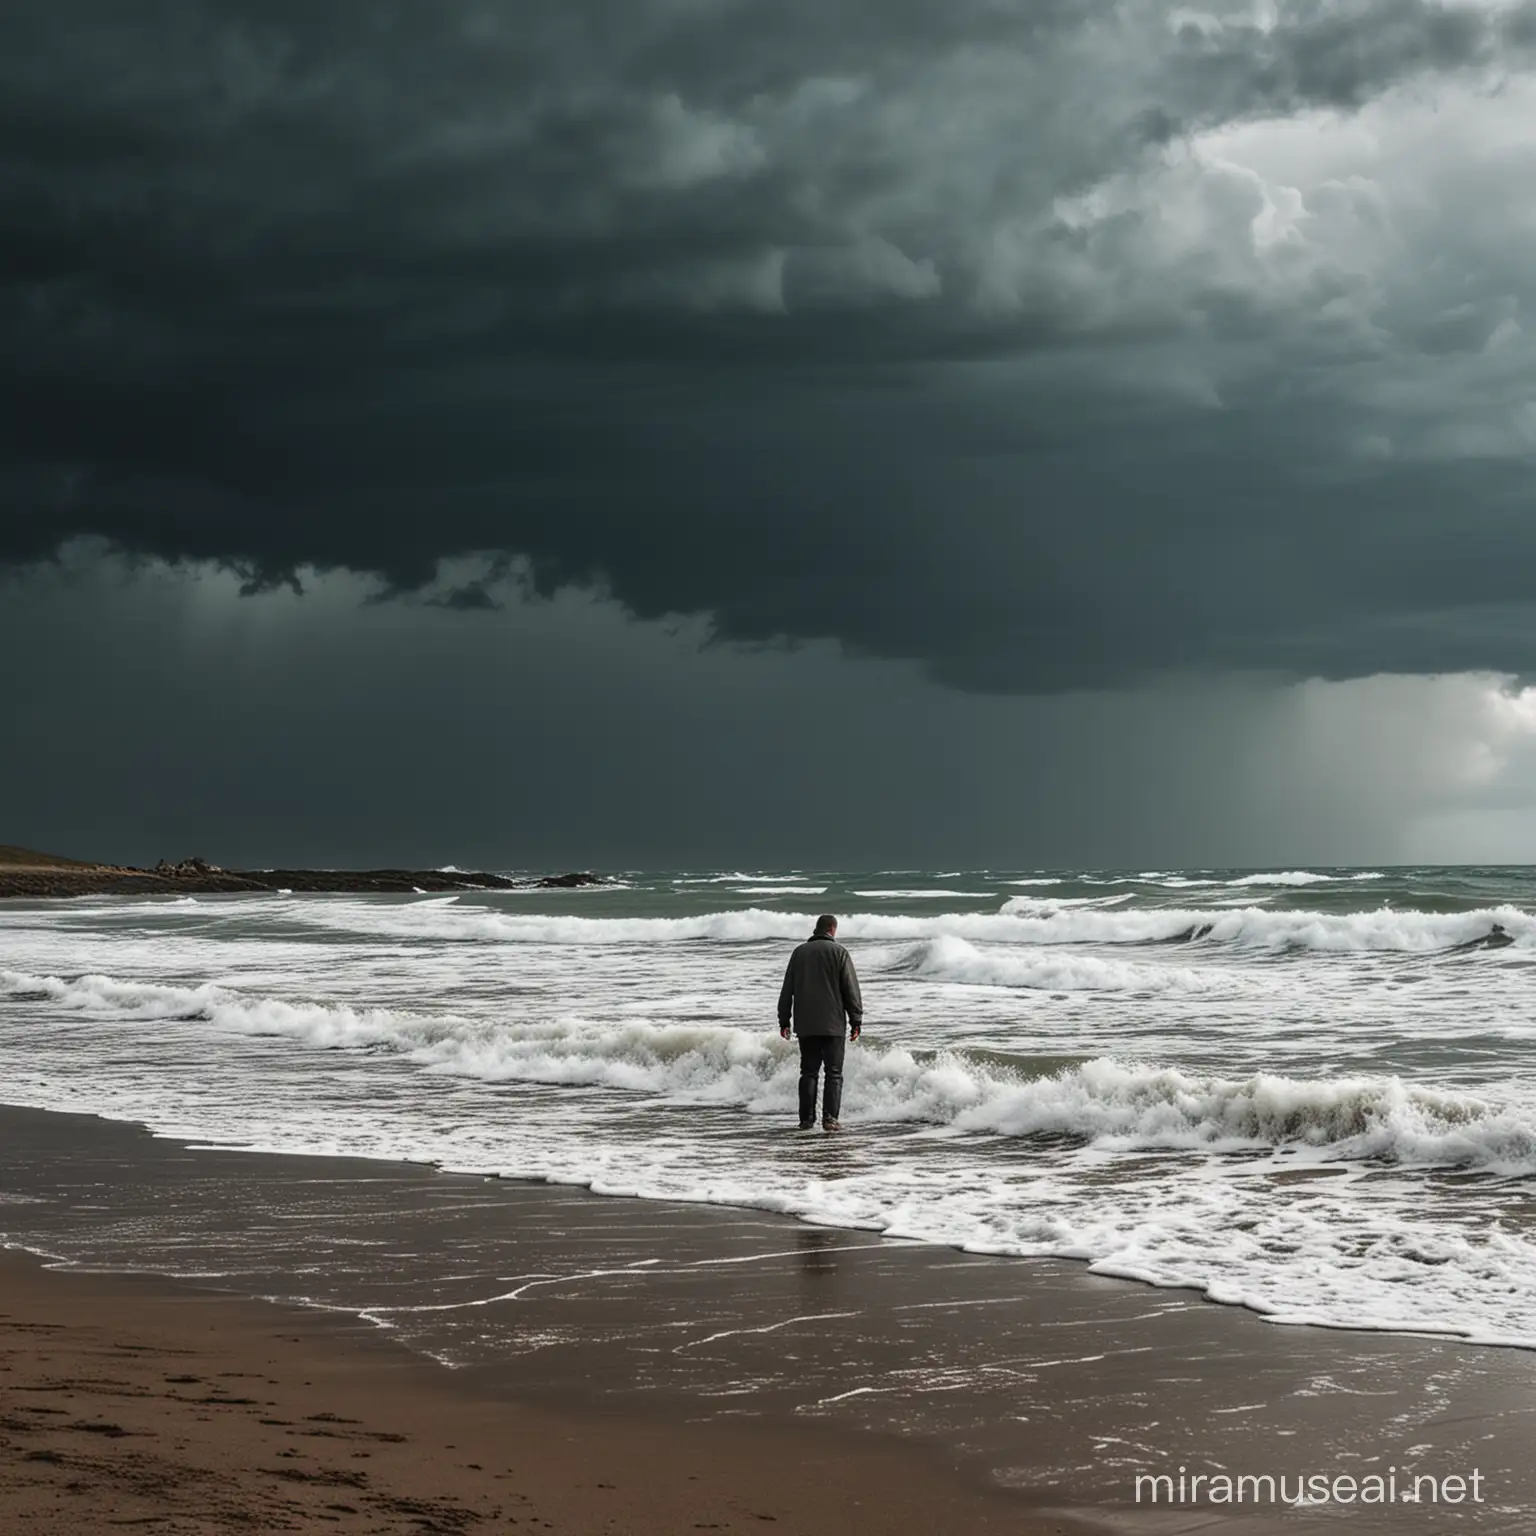 Lonely Man Walking on Stormy Shore